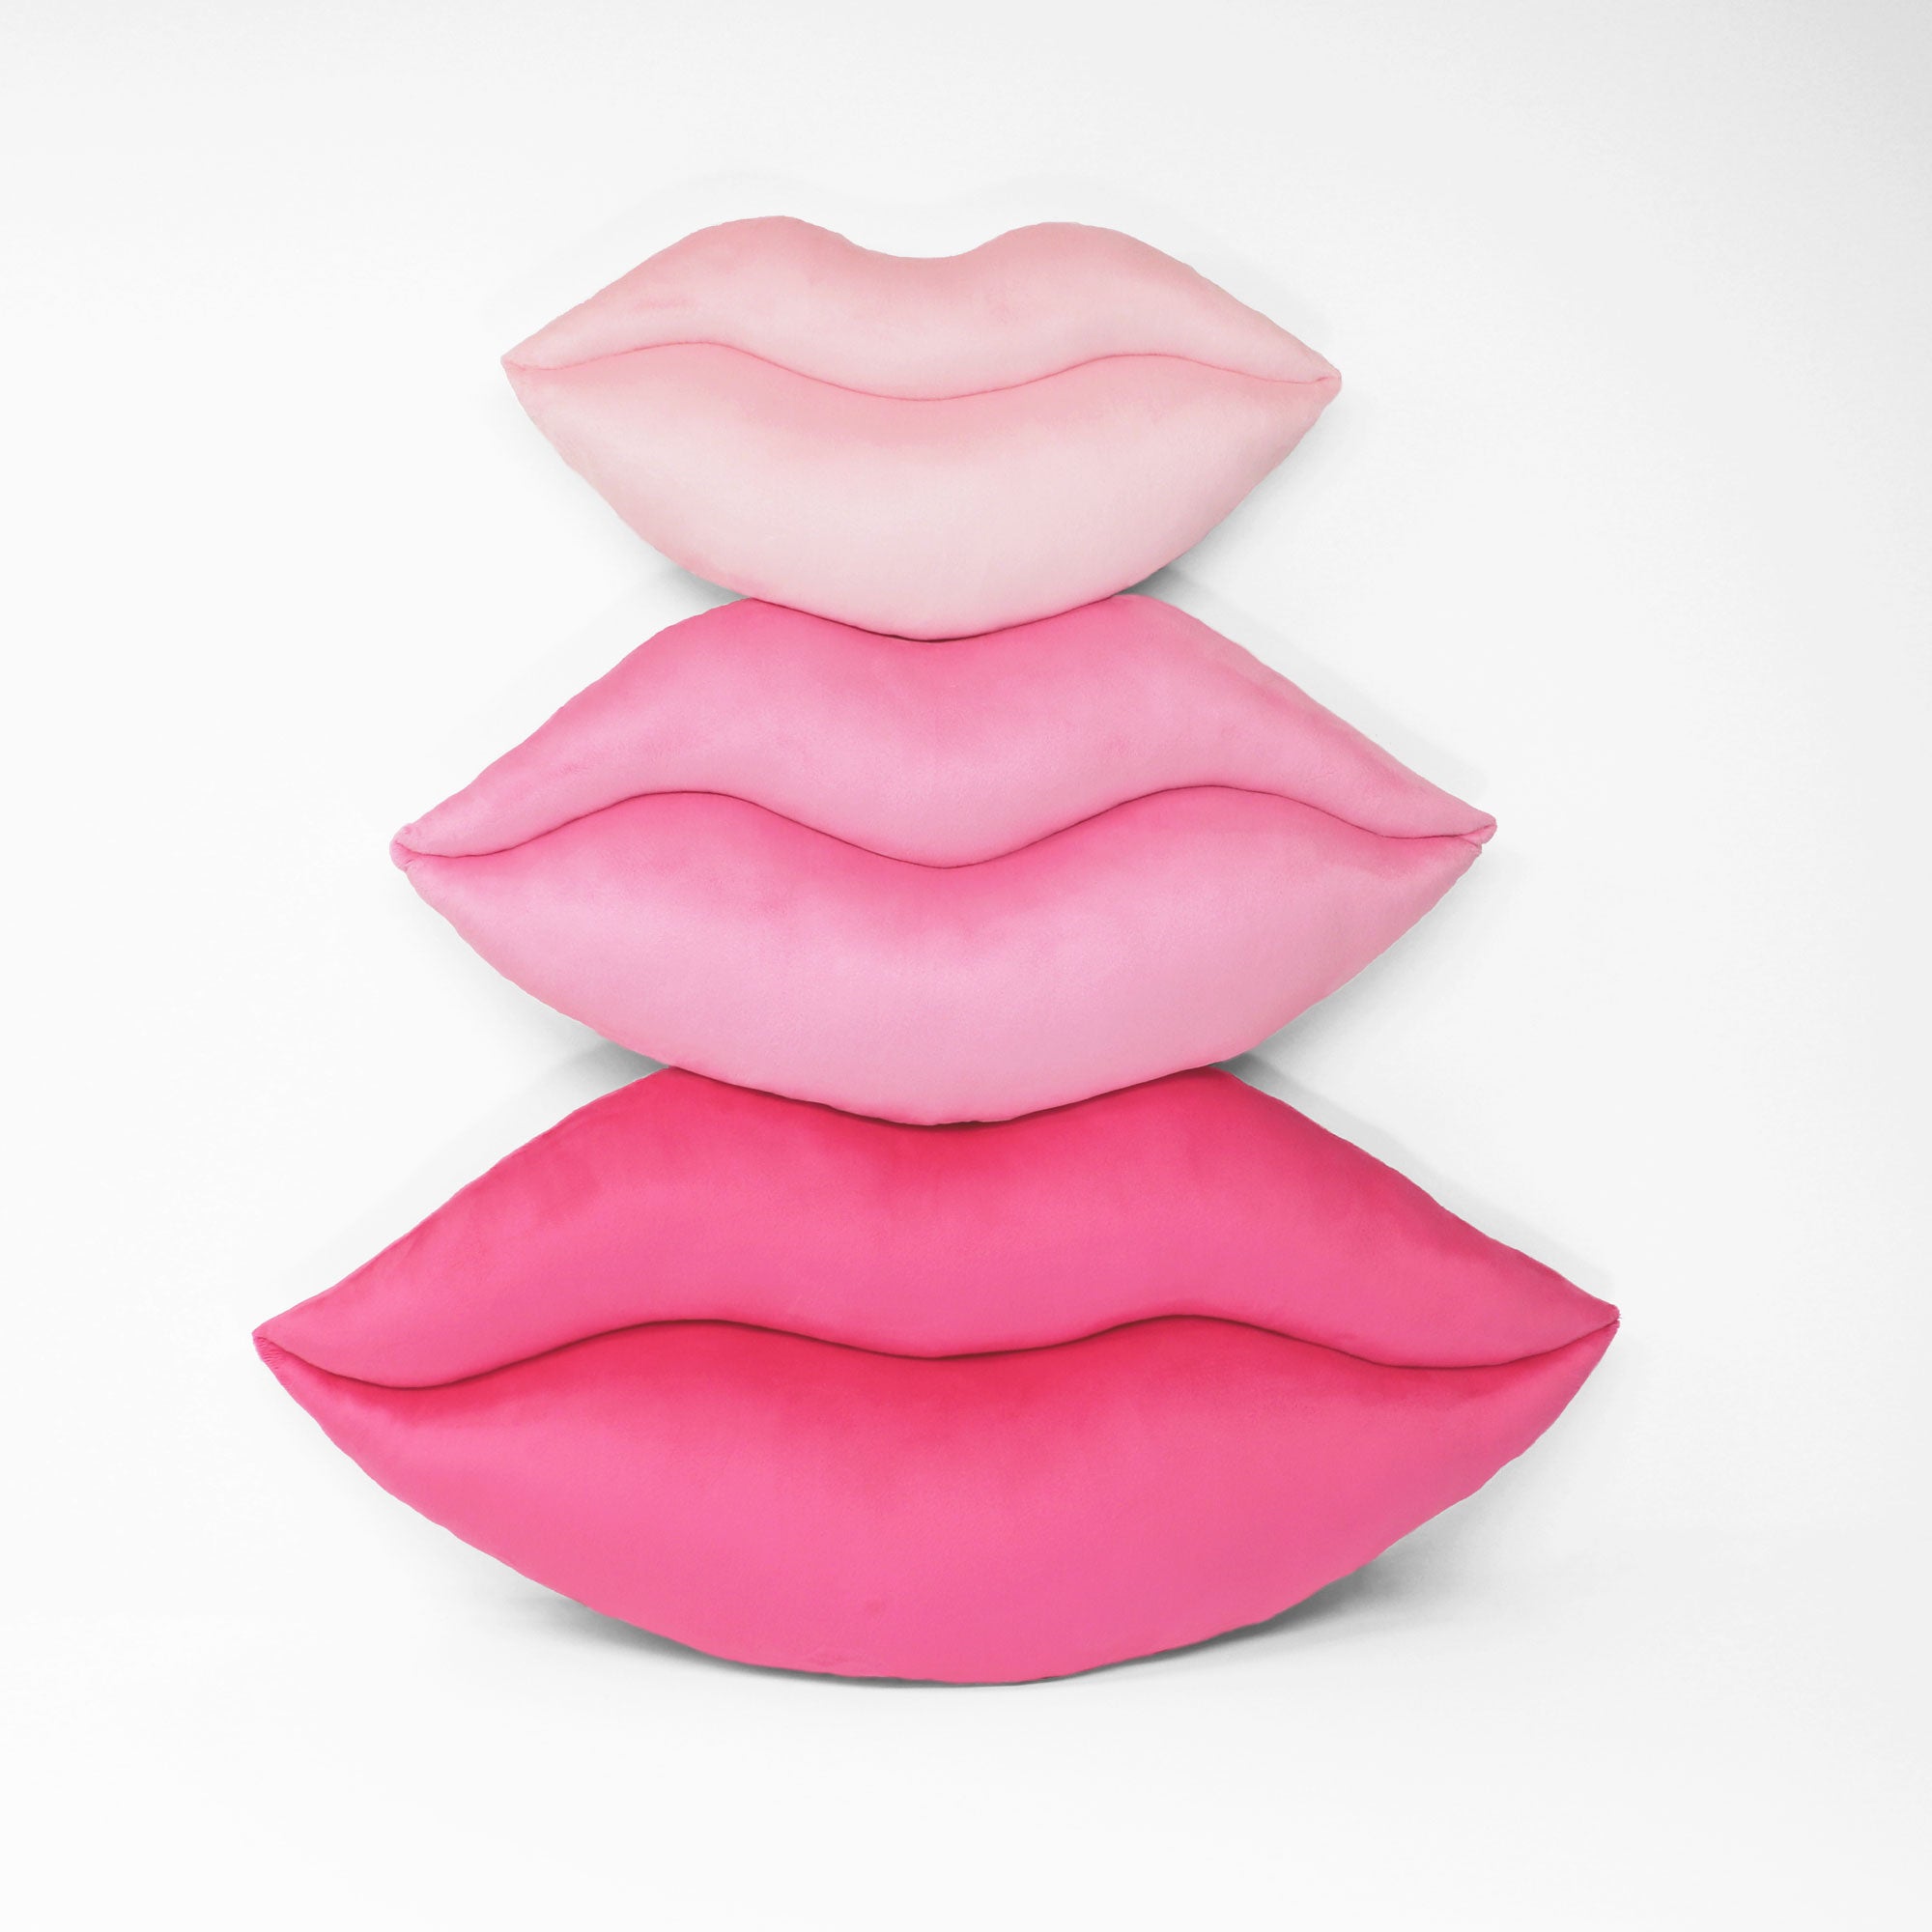 Lips shaped decorative throw pillows shown in three colors and three sizes.